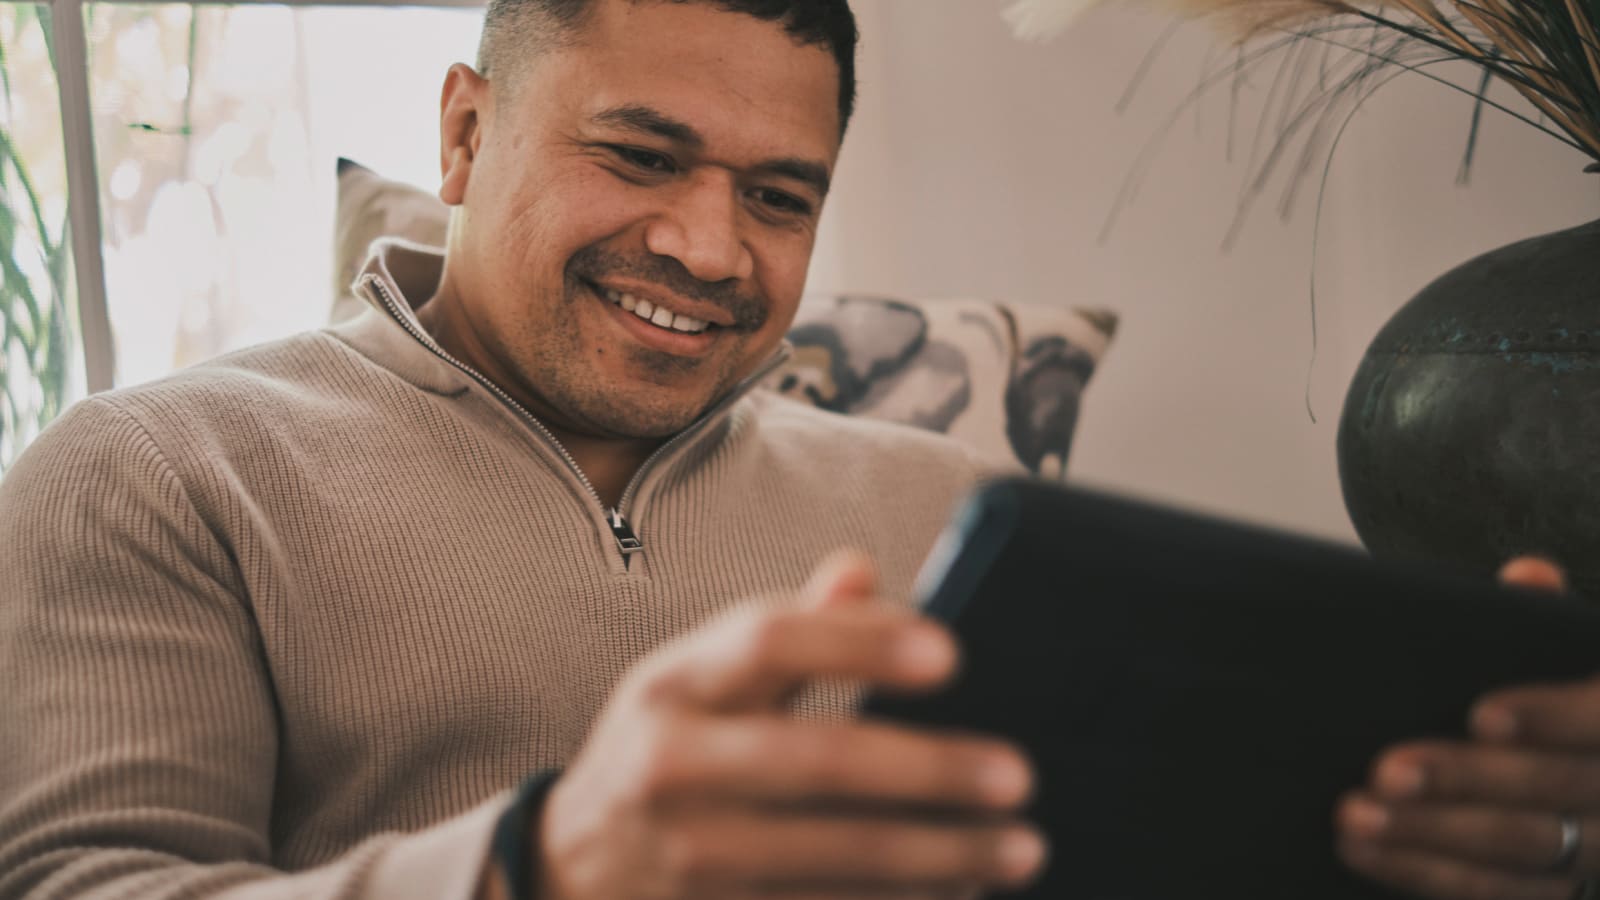 'A man smiling and looking at a tablet.'